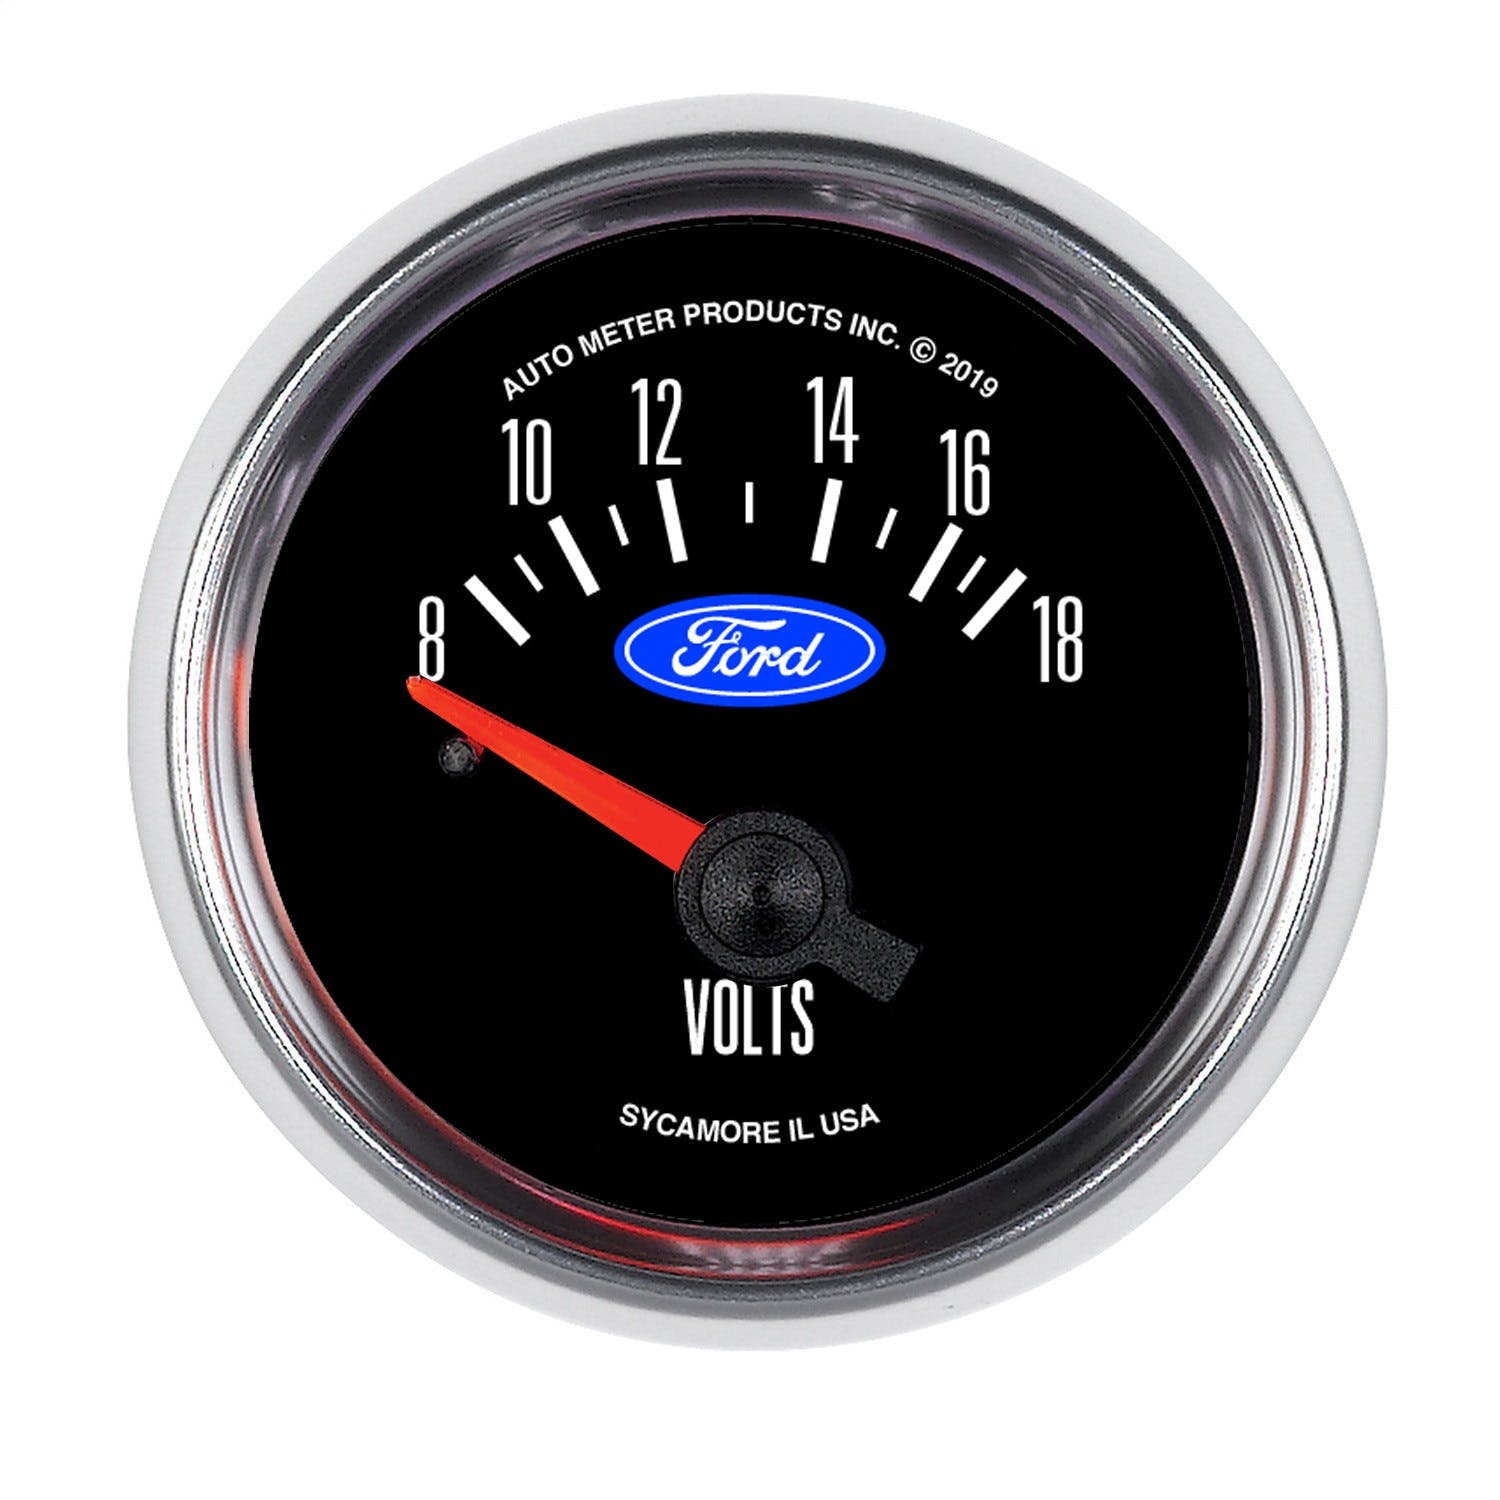 AutoMeter Products 880823 Voltmeter Gauge, 2 1/16, 18V, Electric, Ford Racing